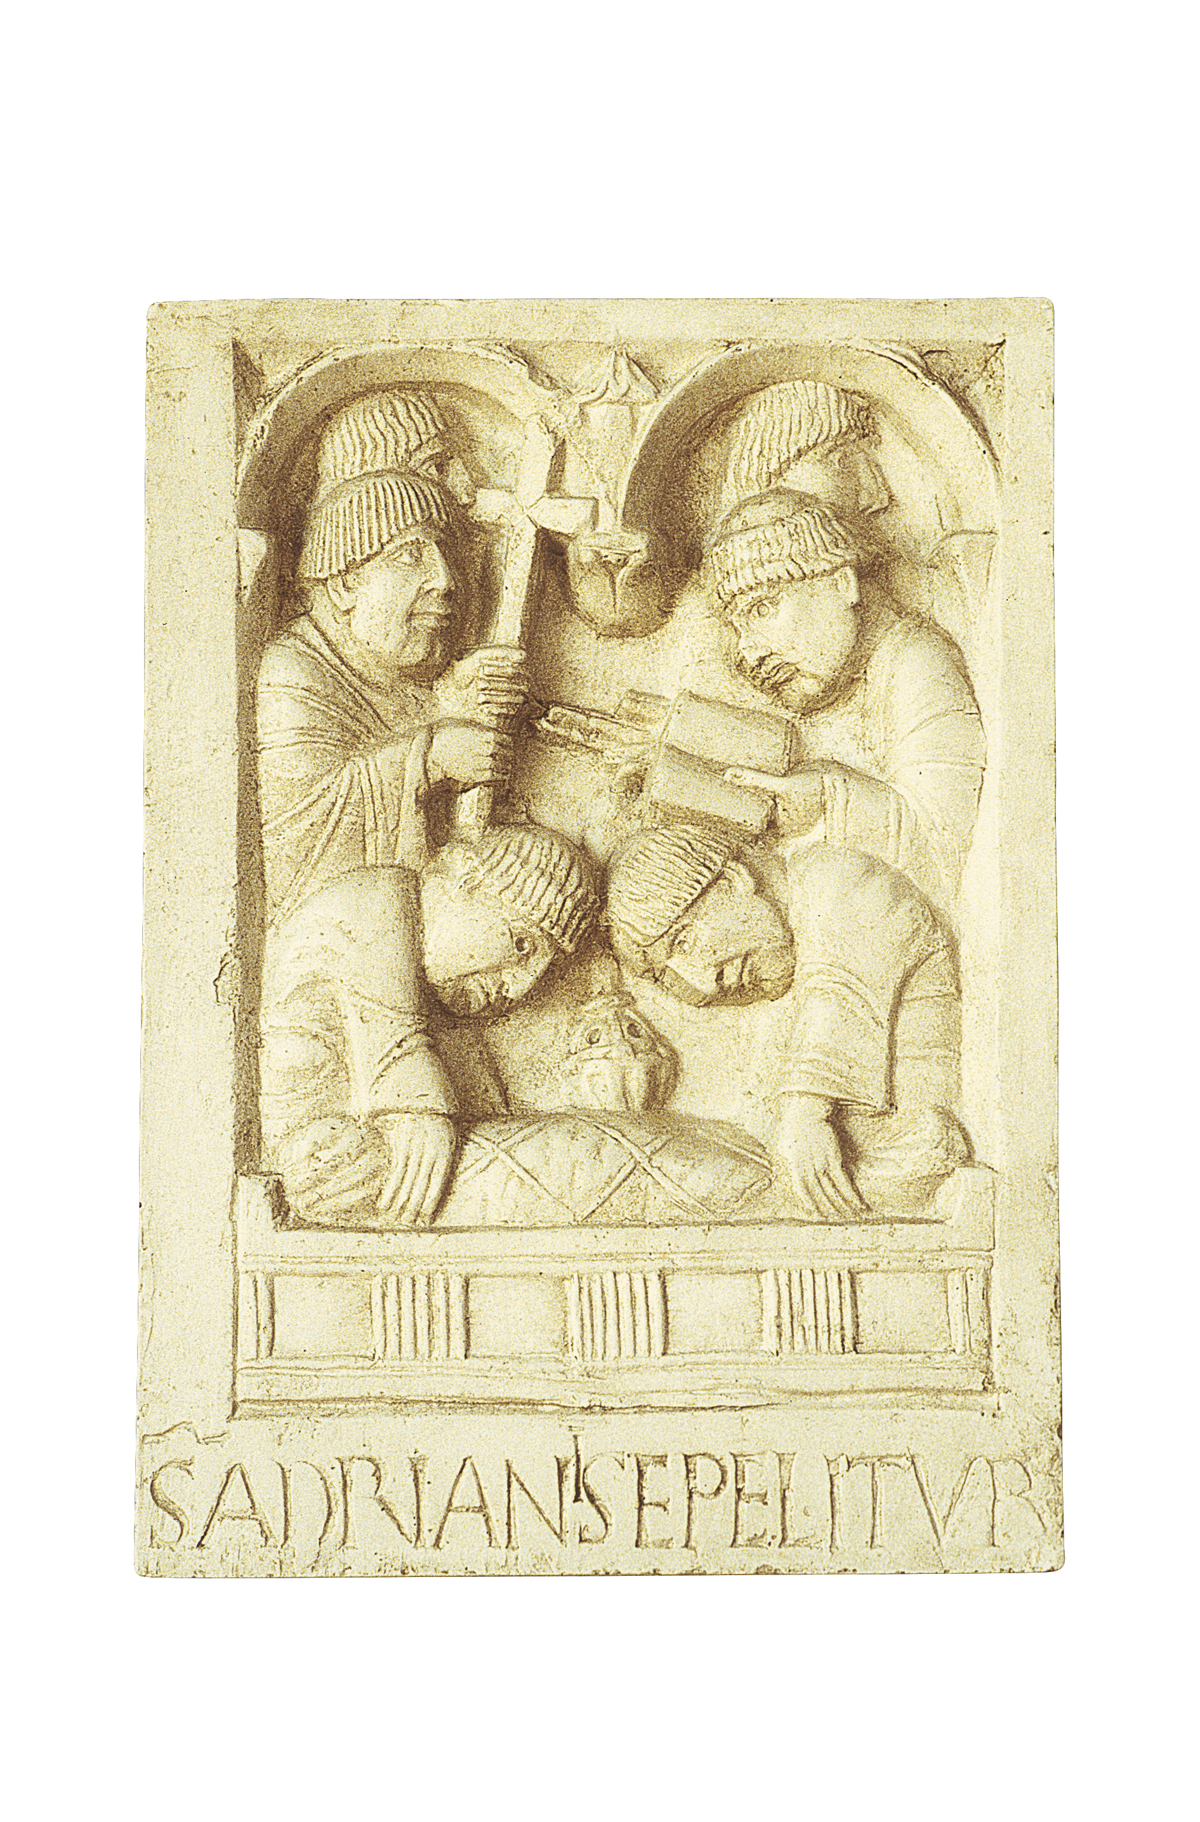 The burial of Pope Hadrian III in the Abbey, a carved panel from the portal of Nonantola Abbey